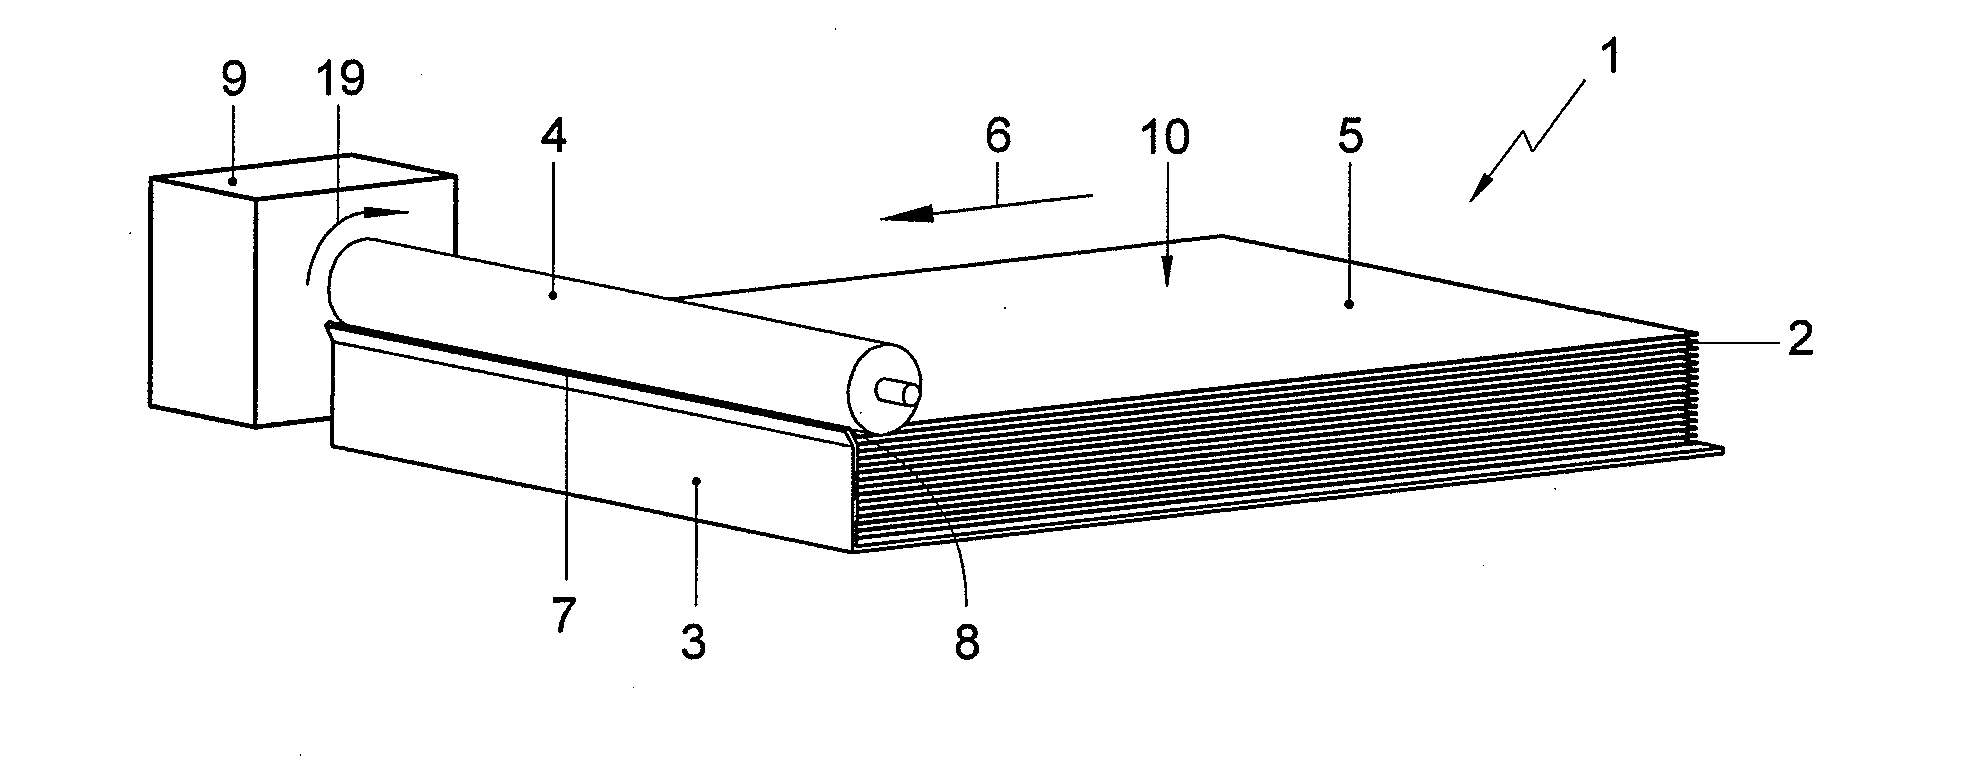 Separator for separating envelopes from a stack